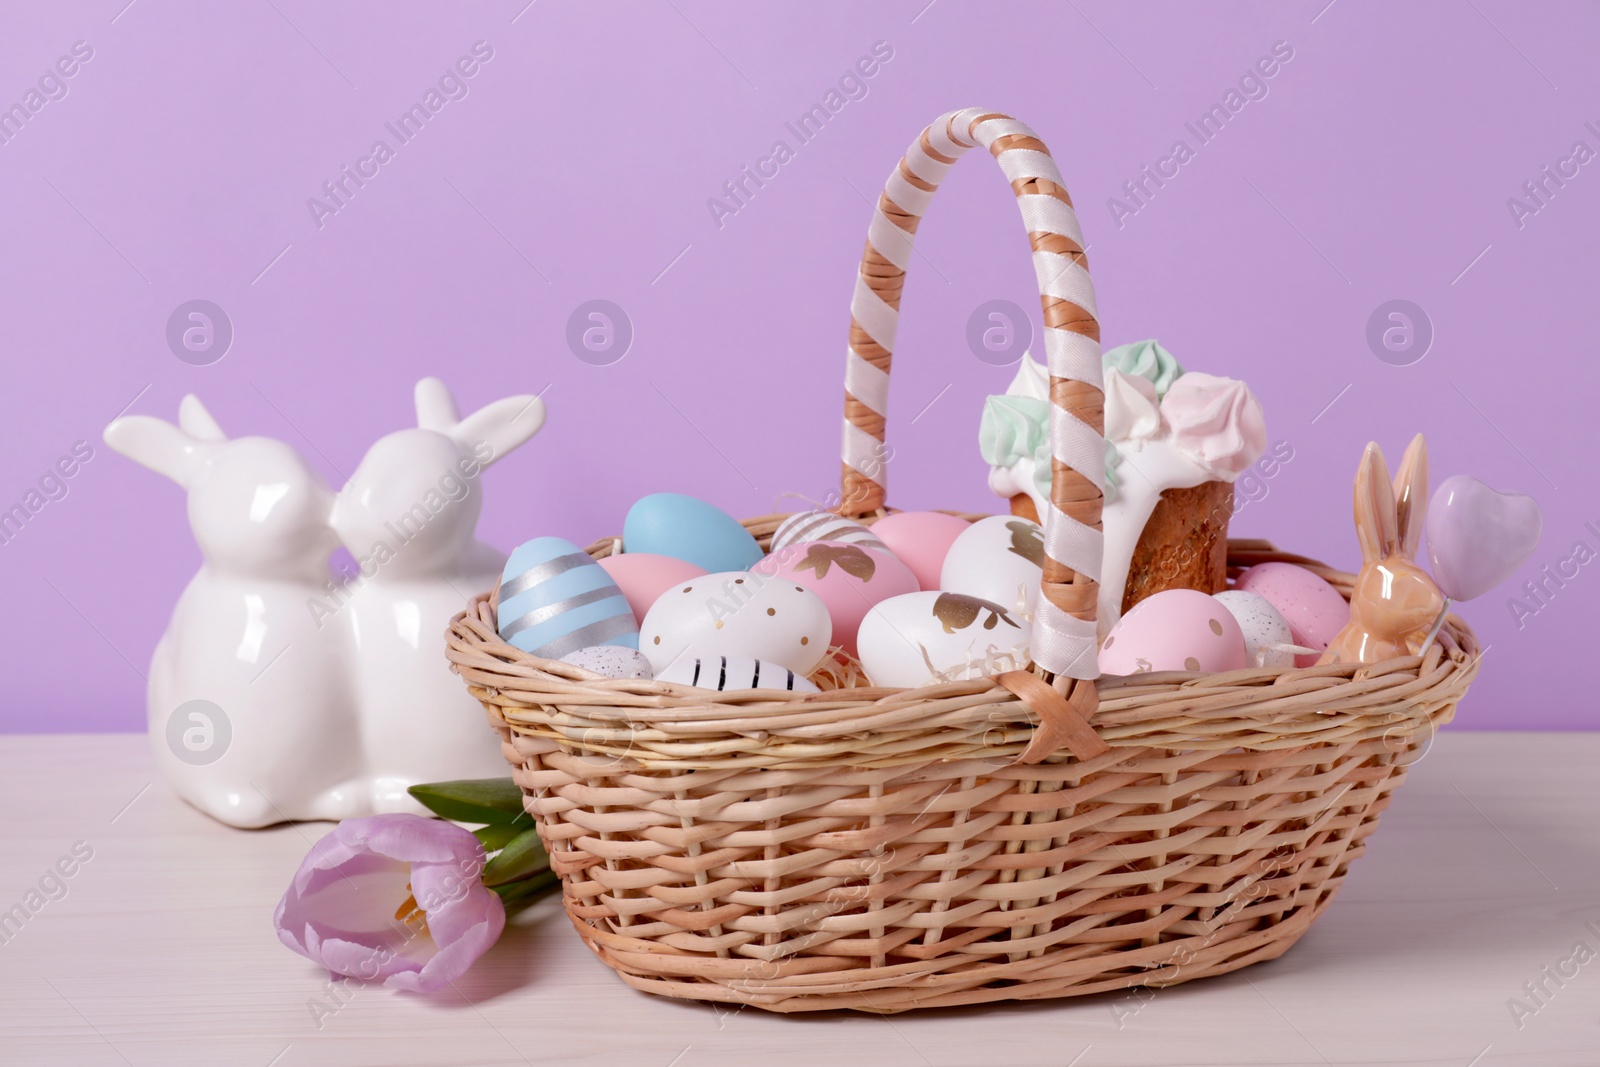 Photo of Easter basket with painted eggs, cake, flower and rabbits figure on white wooden table